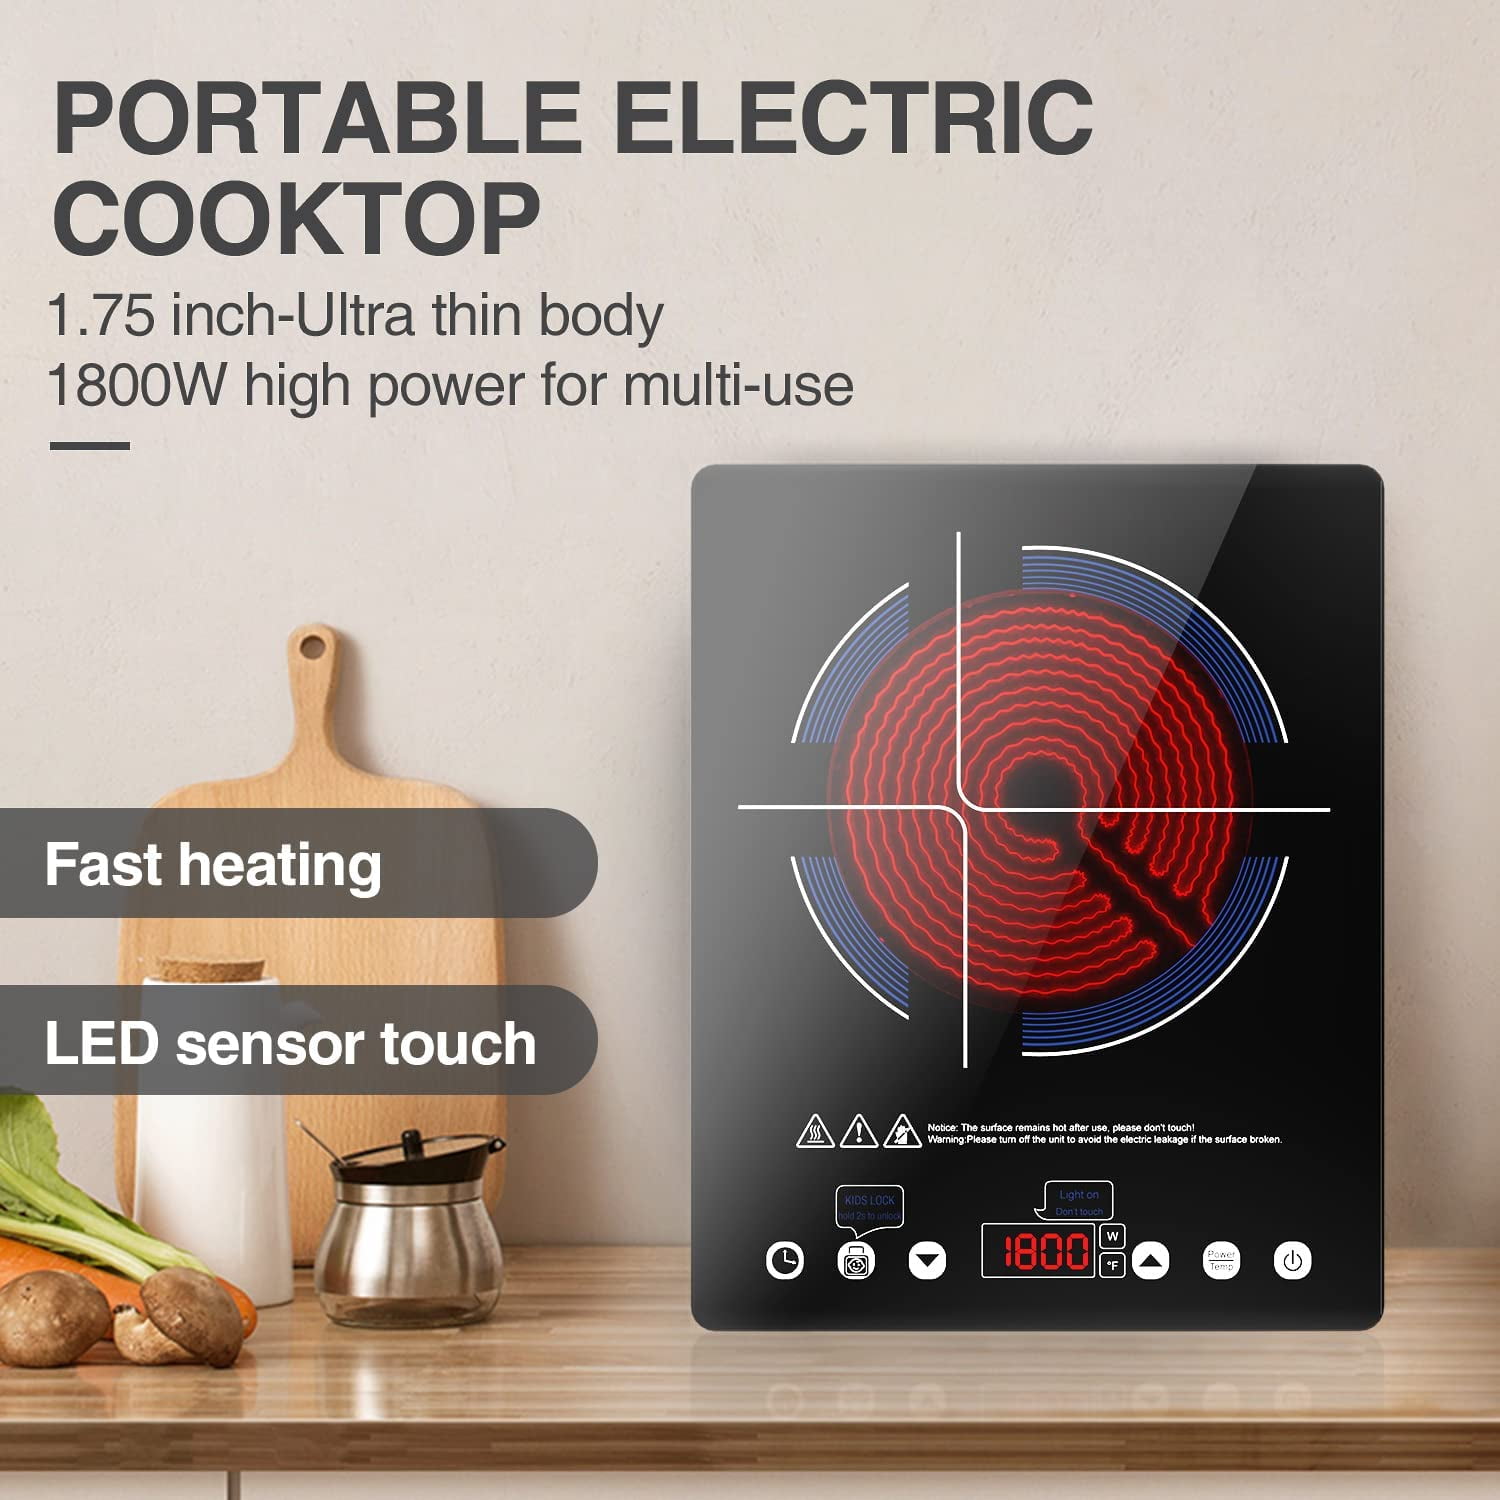 Electric Cooktop 12 Inch,Single Burner Plug in Portable 110V Electric  Cooktop, Countertop Ceramic Stove Top with Power Levels and Overheat  Protection